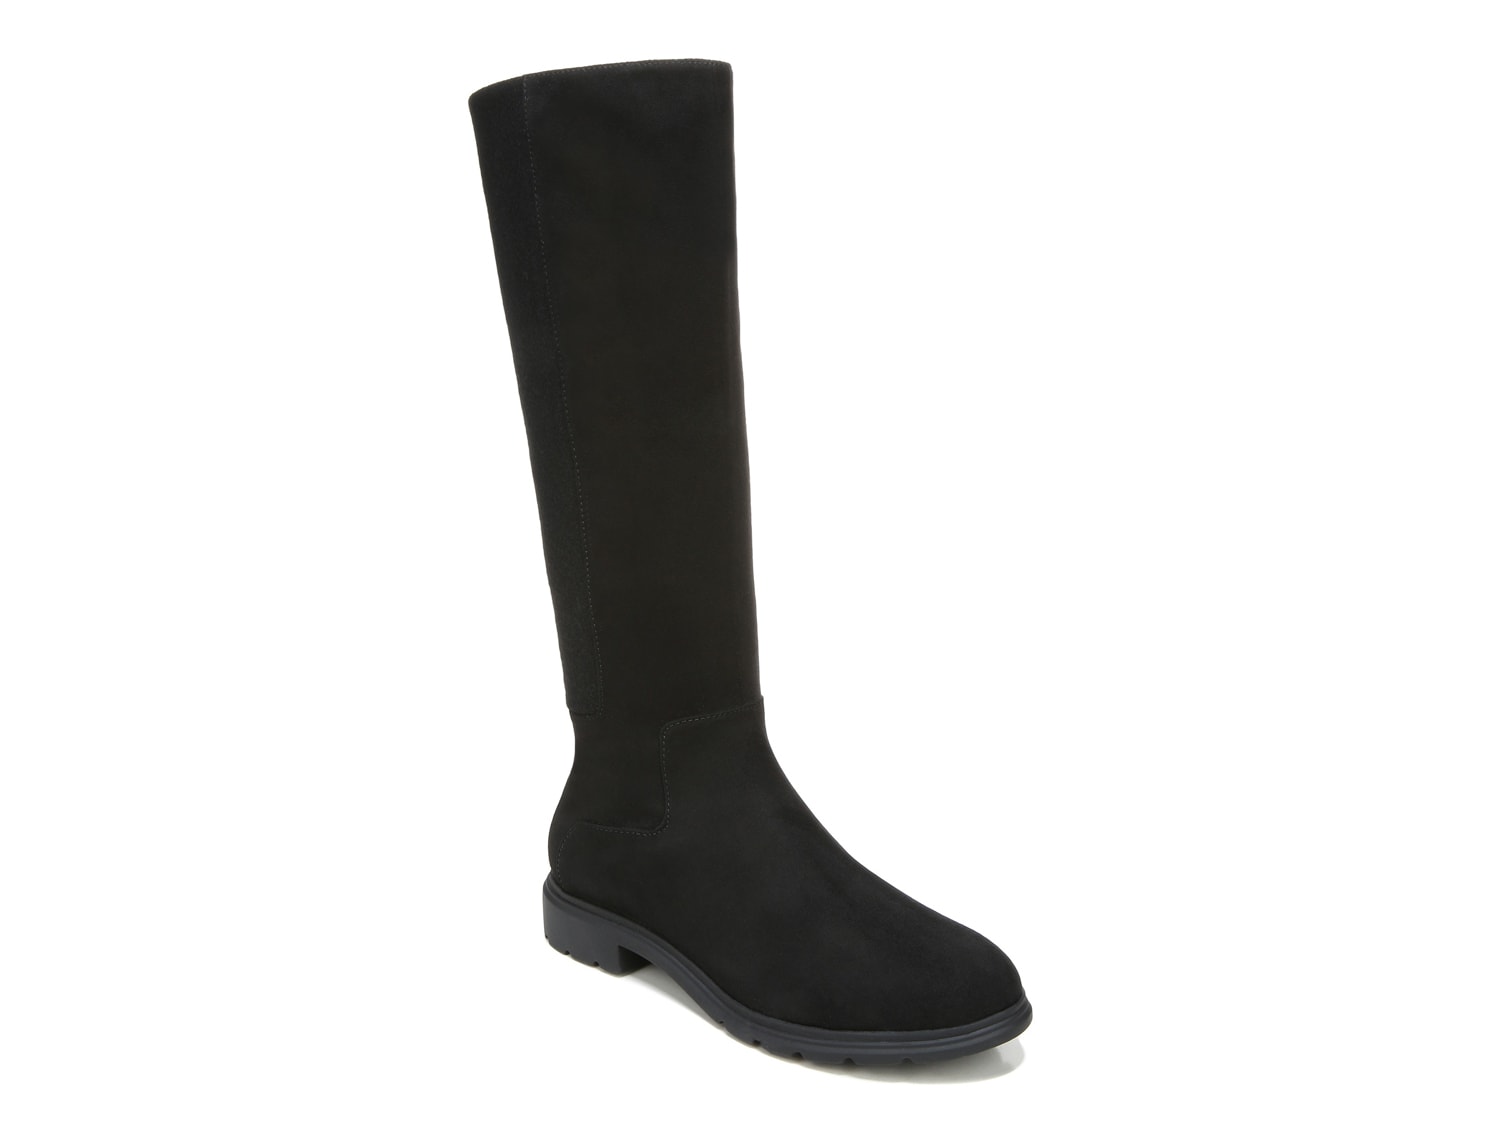 Dr. Scholl's New Start Wide Calf Riding Boot - Free Shipping | DSW